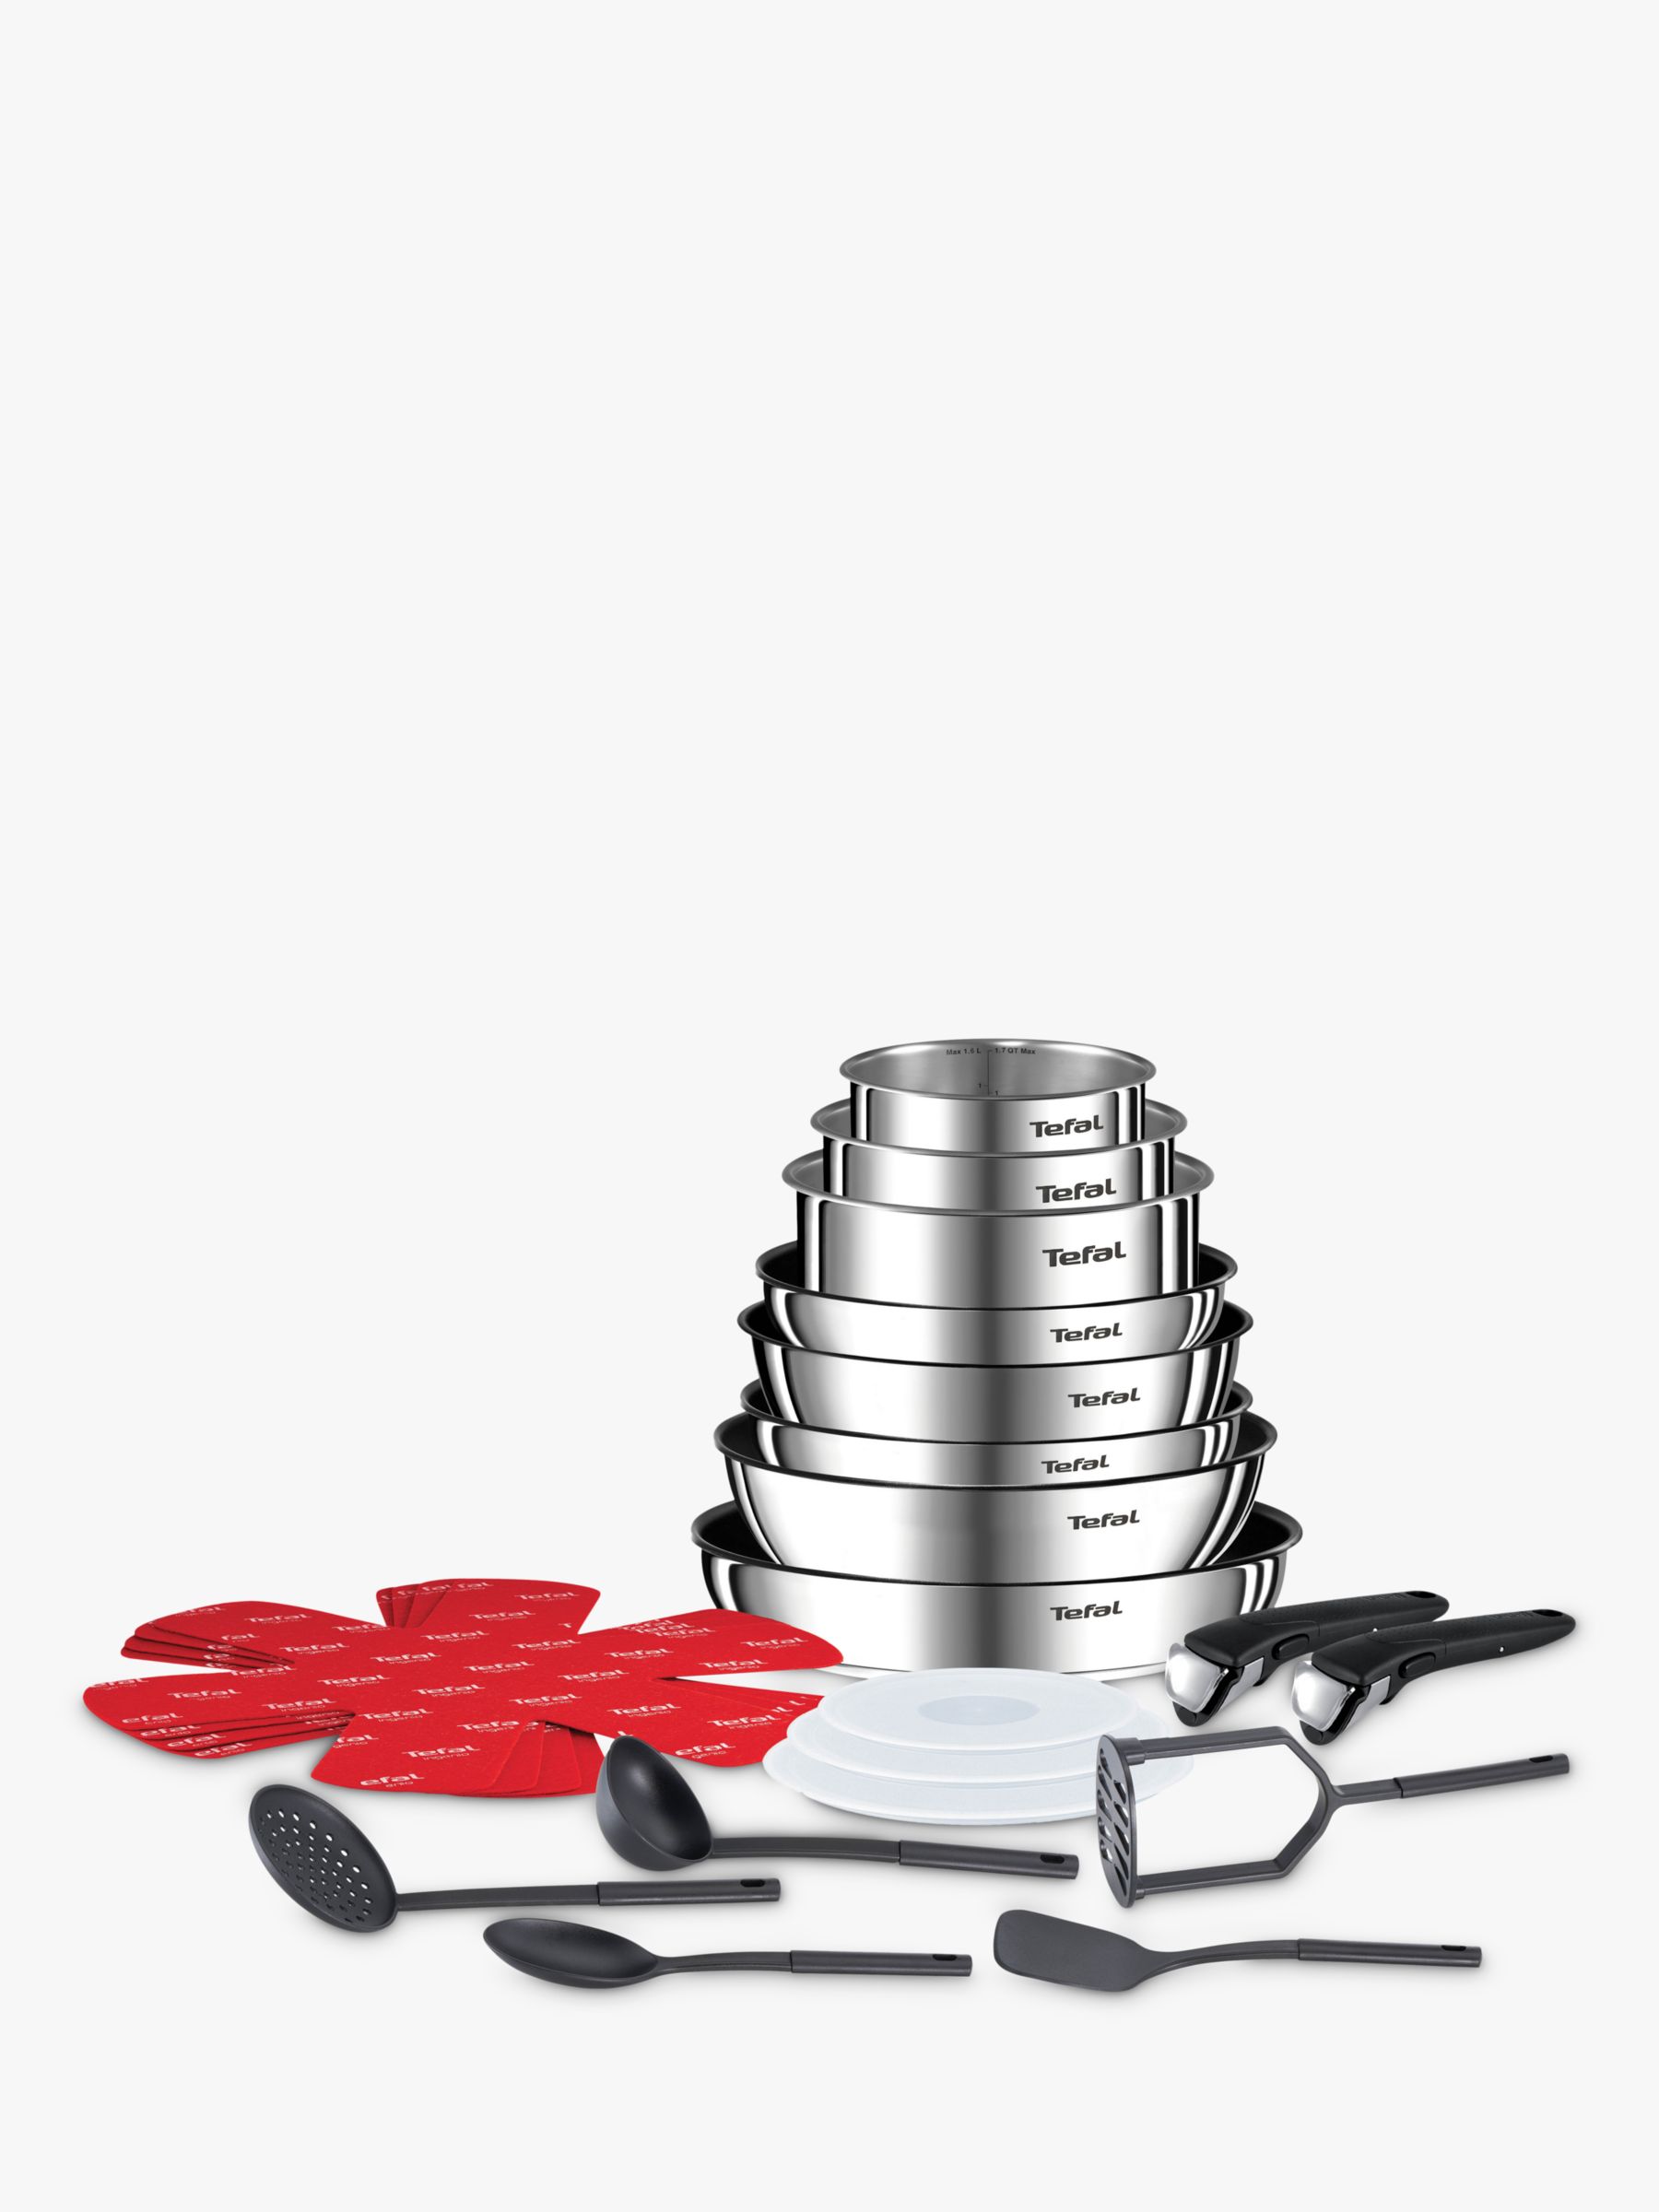 Tefal Ingenio Emotion Stainless Steel Frying and Saucepan Set, 22 Piece